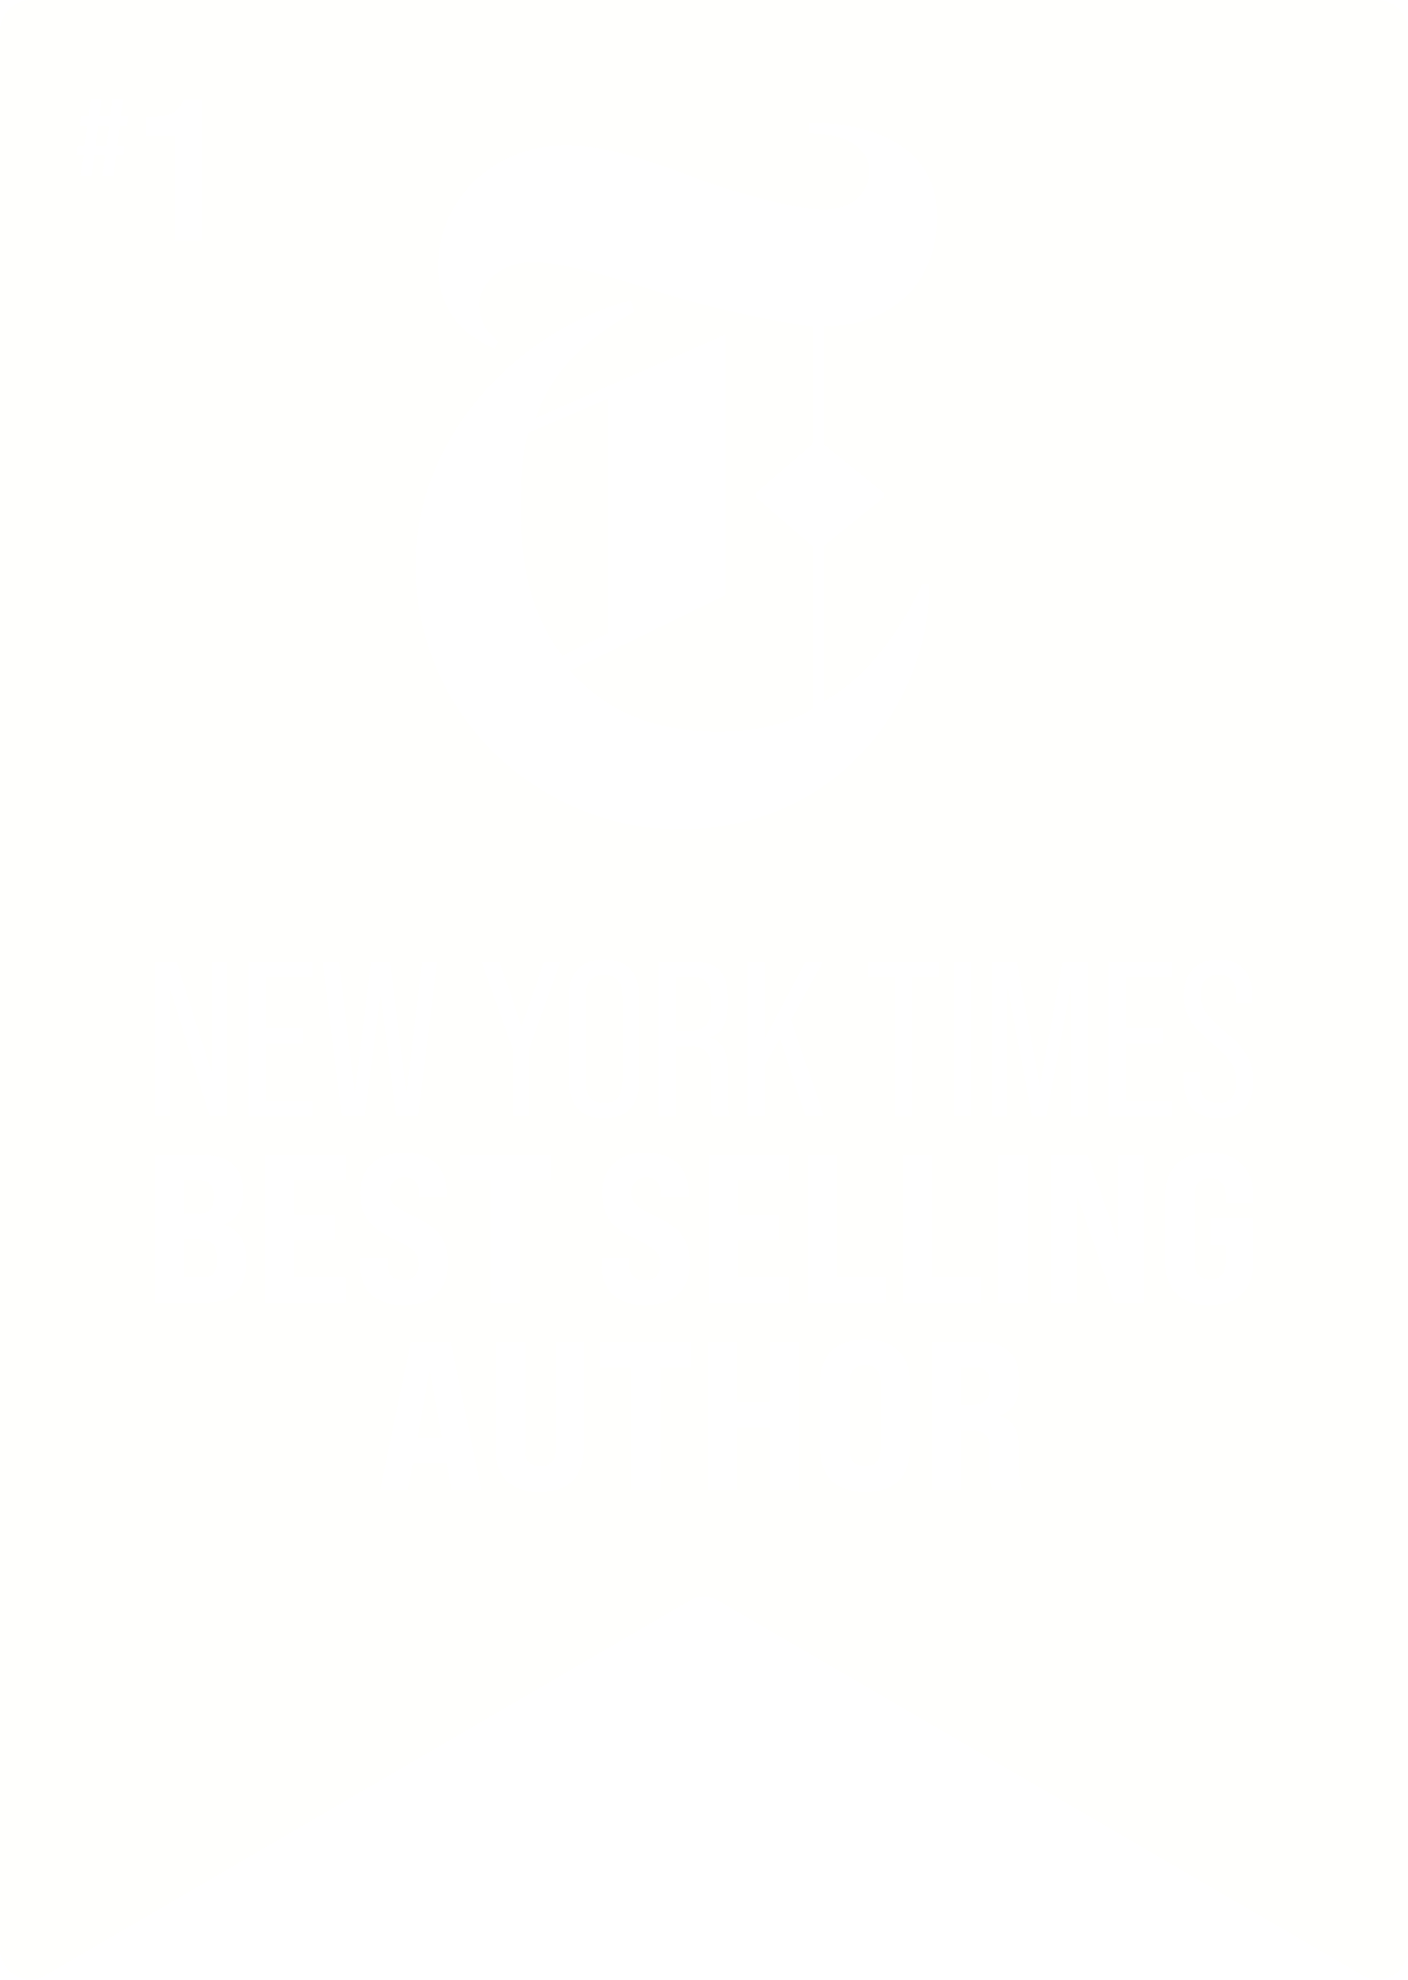 #1 New York Best Selling Author